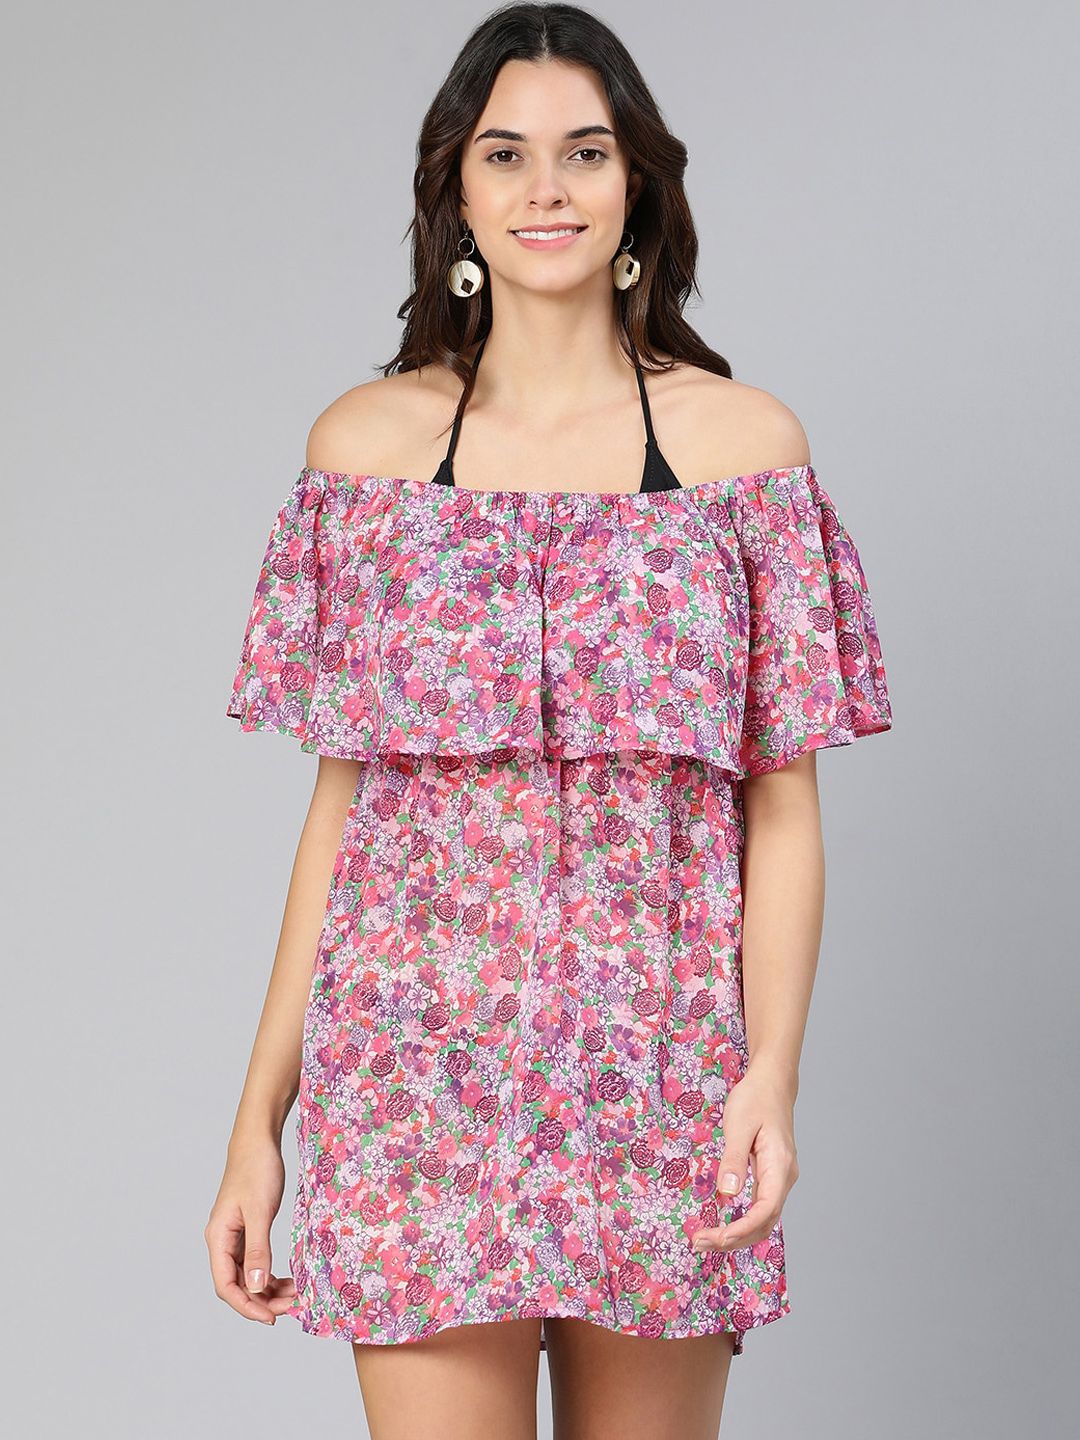 Oxolloxo Women Pink & Green Floral Printed Cover-Up Dress Price in India